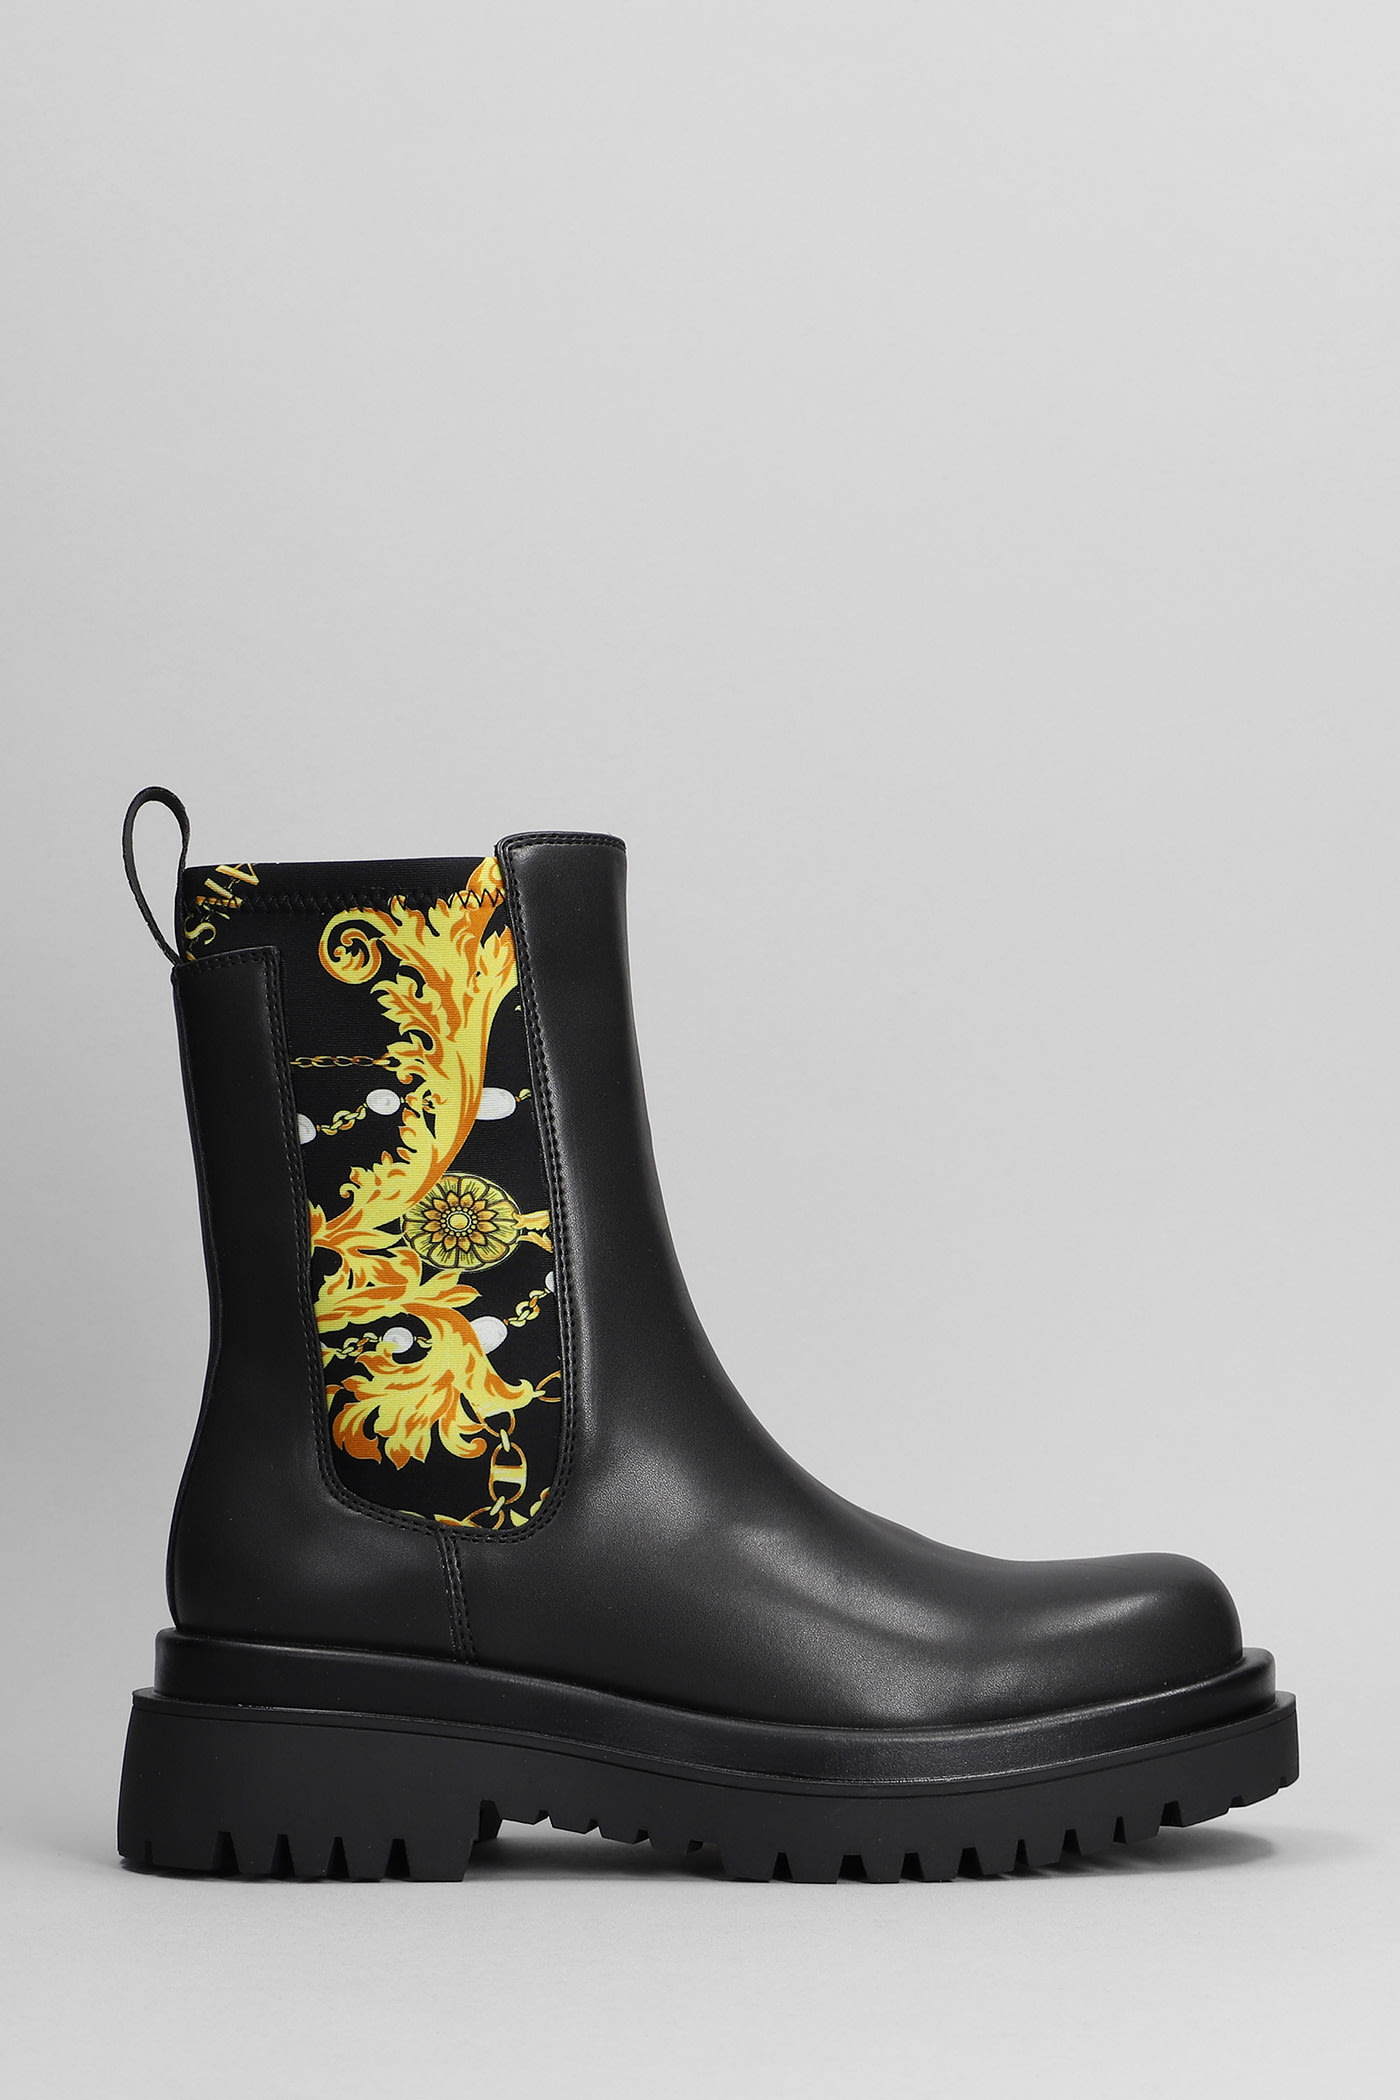 VERSACE JEANS COUTURE COMBAT BOOTS IN BLACK LEATHER